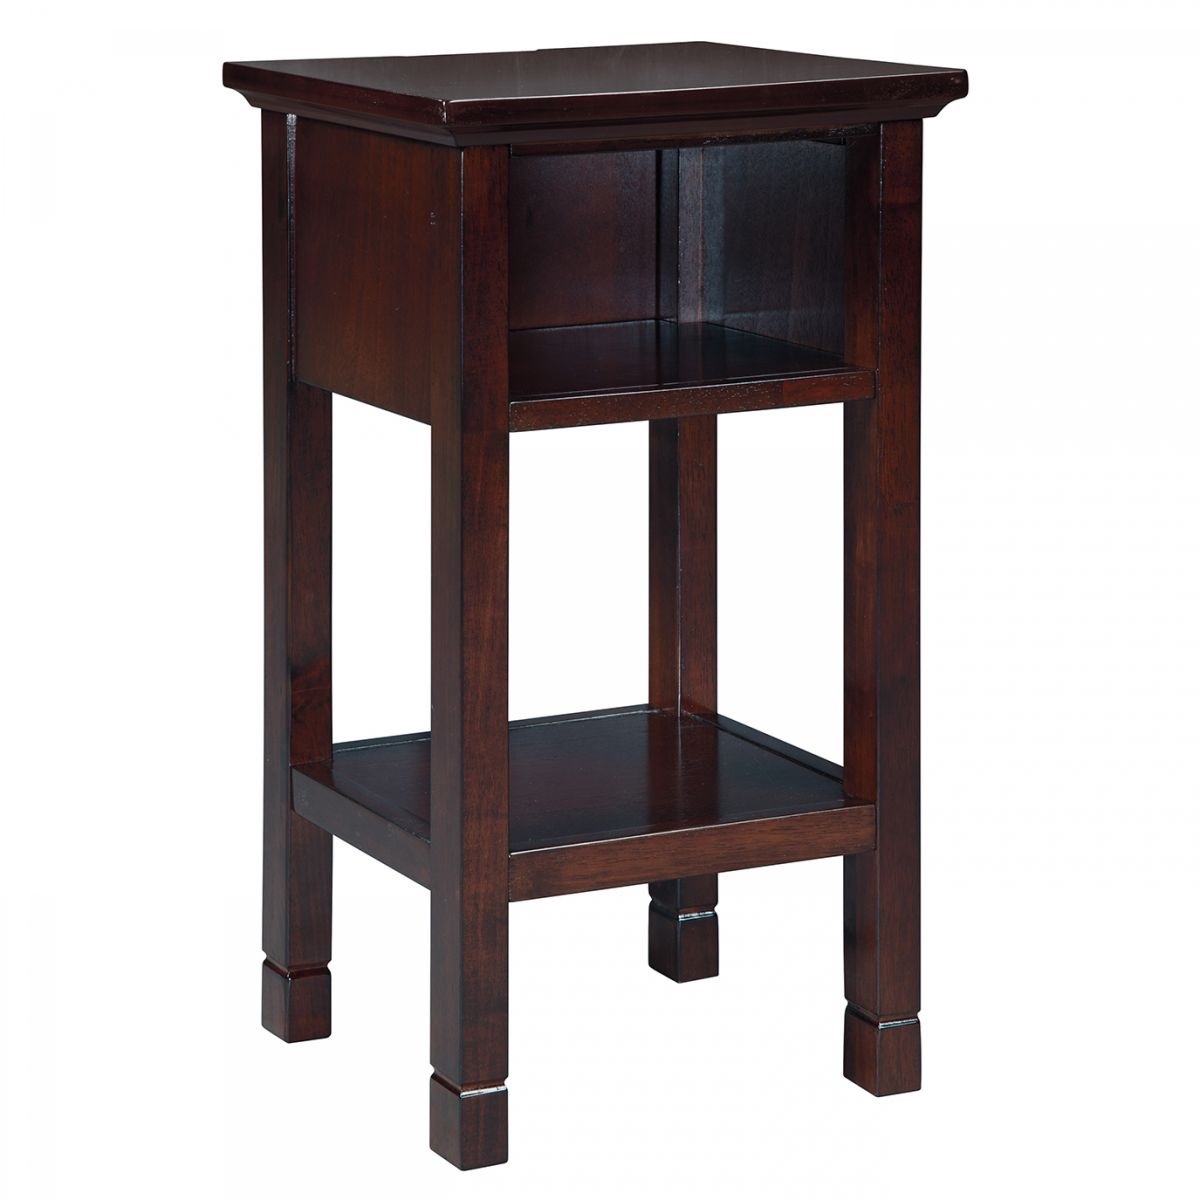 marnville brown accent table with usb port badcock more ture inch high end tables wood console cabinet entry baskets centrepiece round marble retro side dining room cloth metal